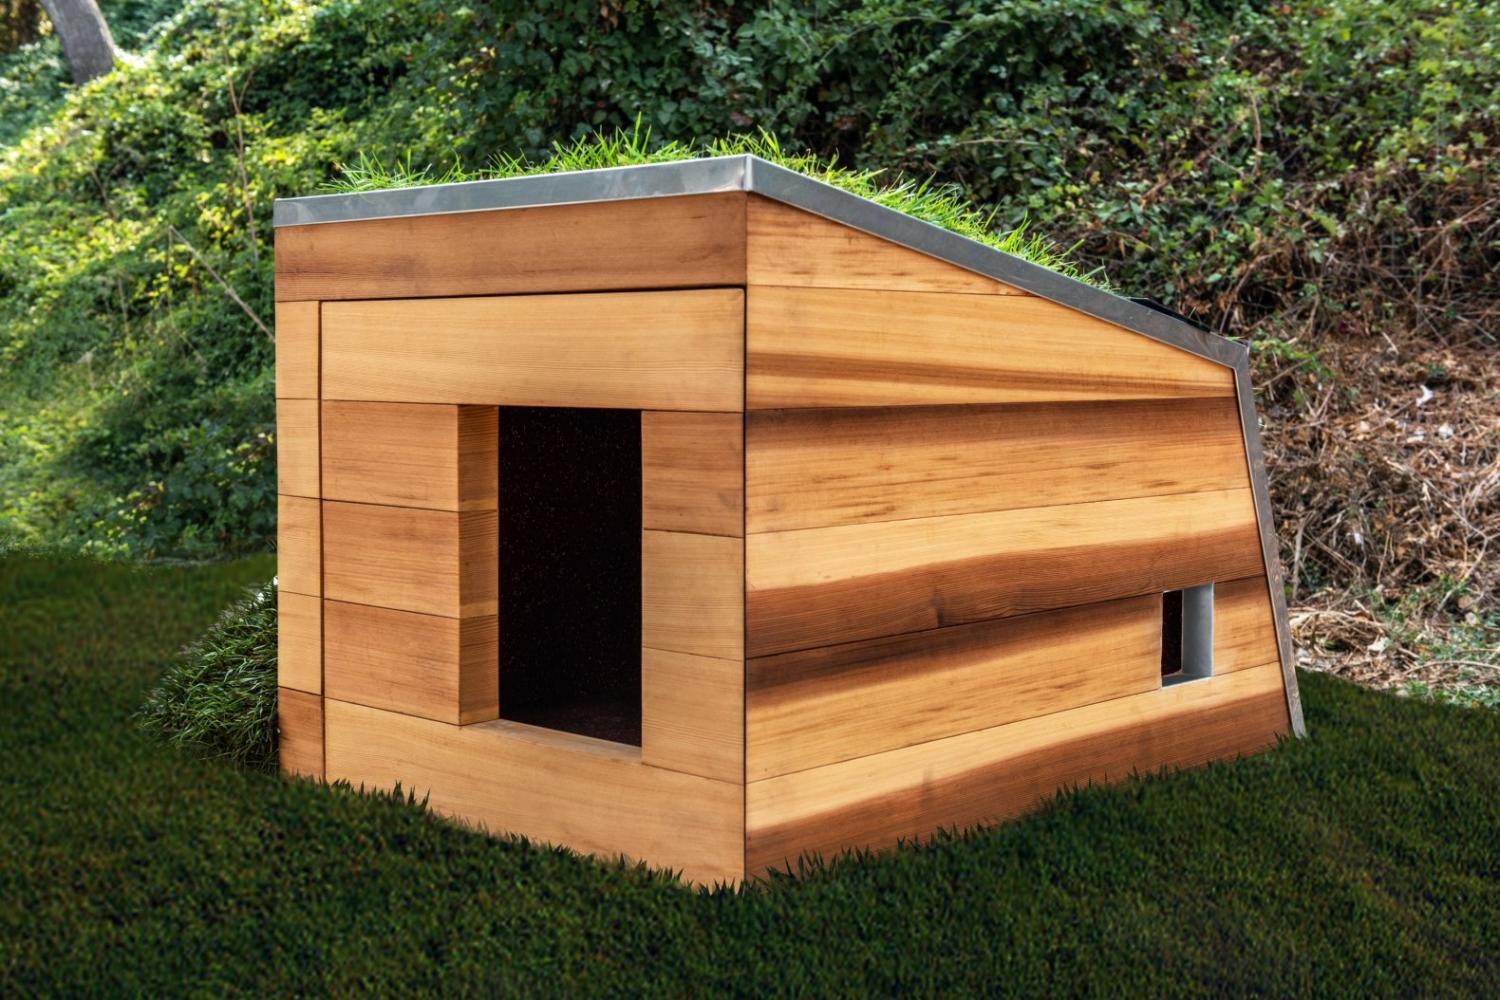 Studio Schicketanz Modern Dog House Is Made With Grass Ramp, and An Automatic Water Faucet On Top